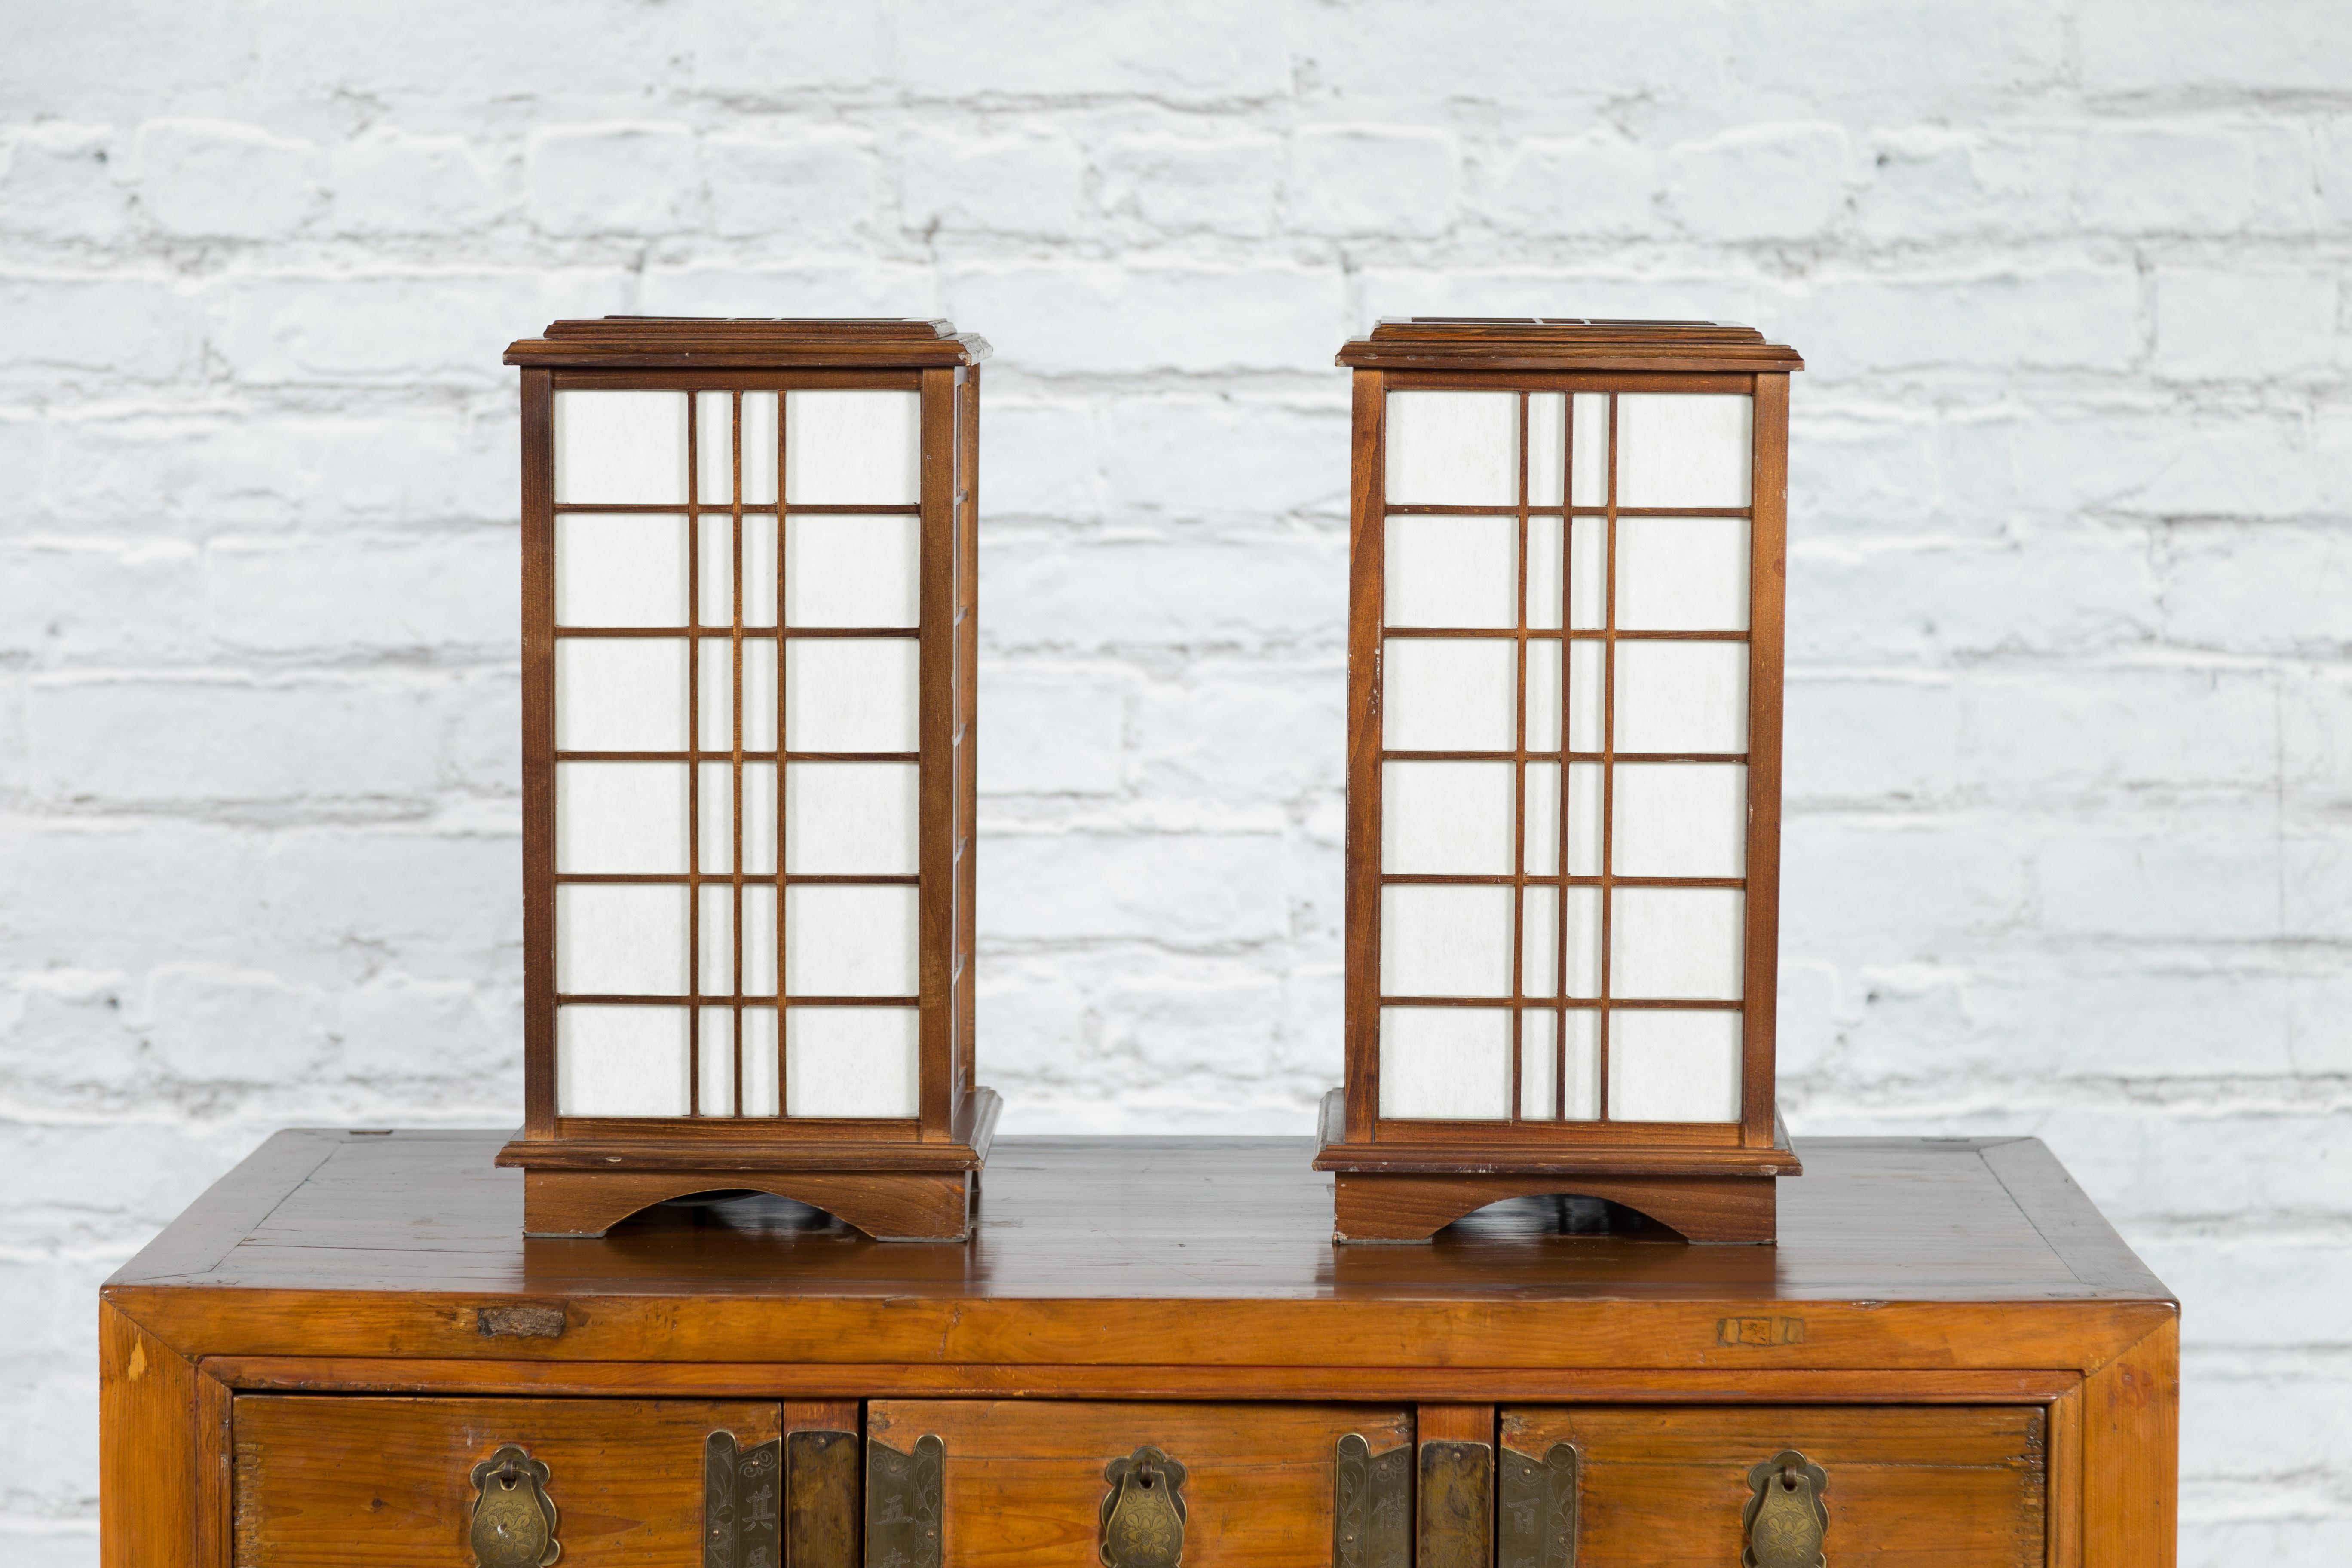 Two vintage Japanese square-shaped wooden table lamps from the mid 20th century, with two light sockets and rice paper panels, priced and sold each individually. Created in Japan during the midcentury period, these vintage table lamps attract the